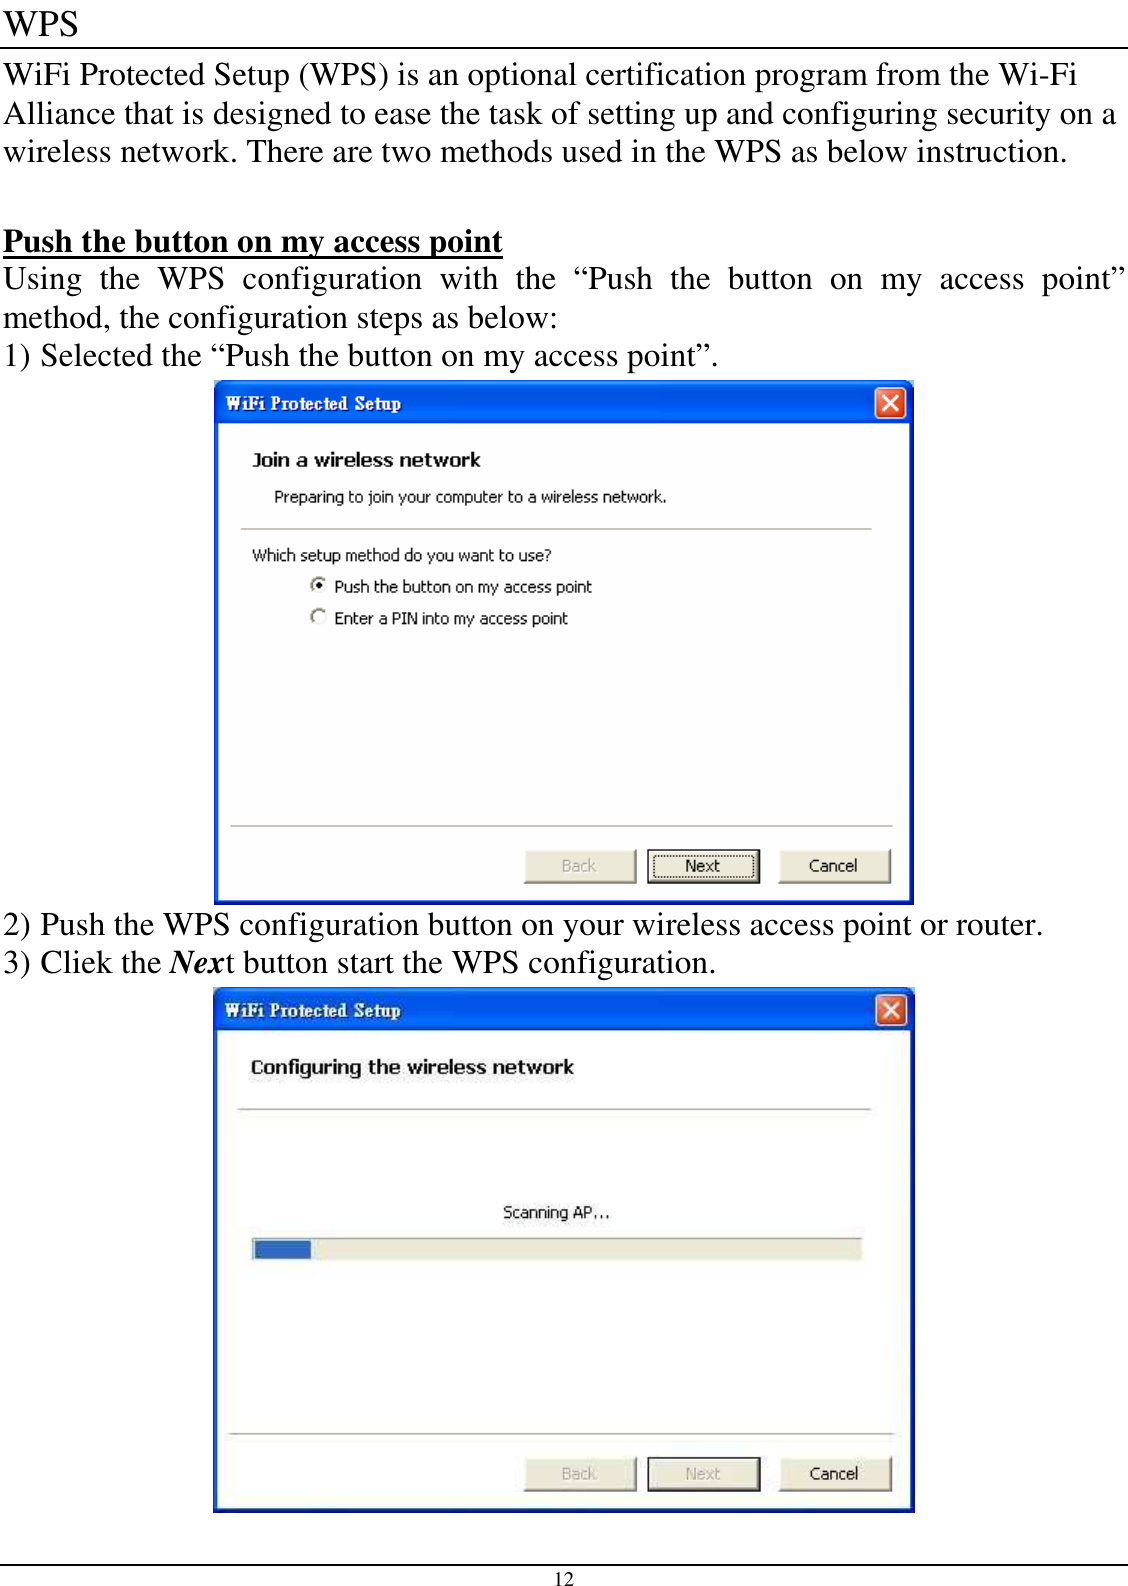  12 WPS WiFi Protected Setup (WPS) is an optional certification program from the Wi-Fi Alliance that is designed to ease the task of setting up and configuring security on a wireless network. There are two methods used in the WPS as below instruction.  Push the button on my access point Using  the  WPS  configuration  with  the  “Push  the  button  on  my  access  point” method, the configuration steps as below: 1) Selected the “Push the button on my access point”.  2) Push the WPS configuration button on your wireless access point or router. 3) Cliek the Next button start the WPS configuration.  